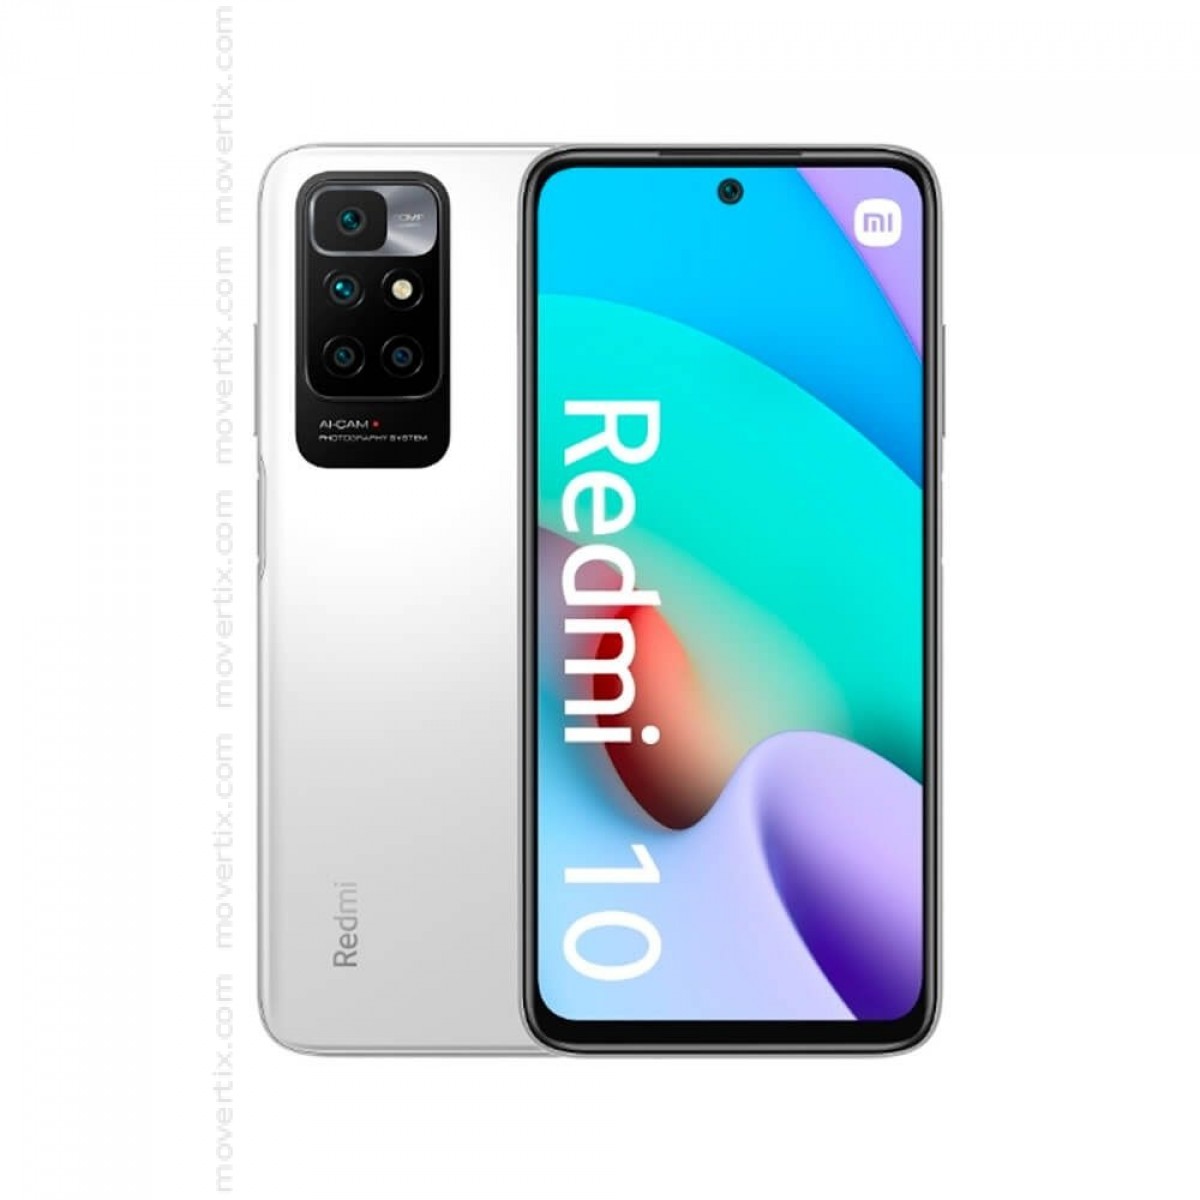 Redmi Note 10 Dual SIM - 6.43 Inches, 128 GB, 4 GB RAM, 4G LTE - Pebble  White: Buy Online at Best Price in Egypt - Souq is now